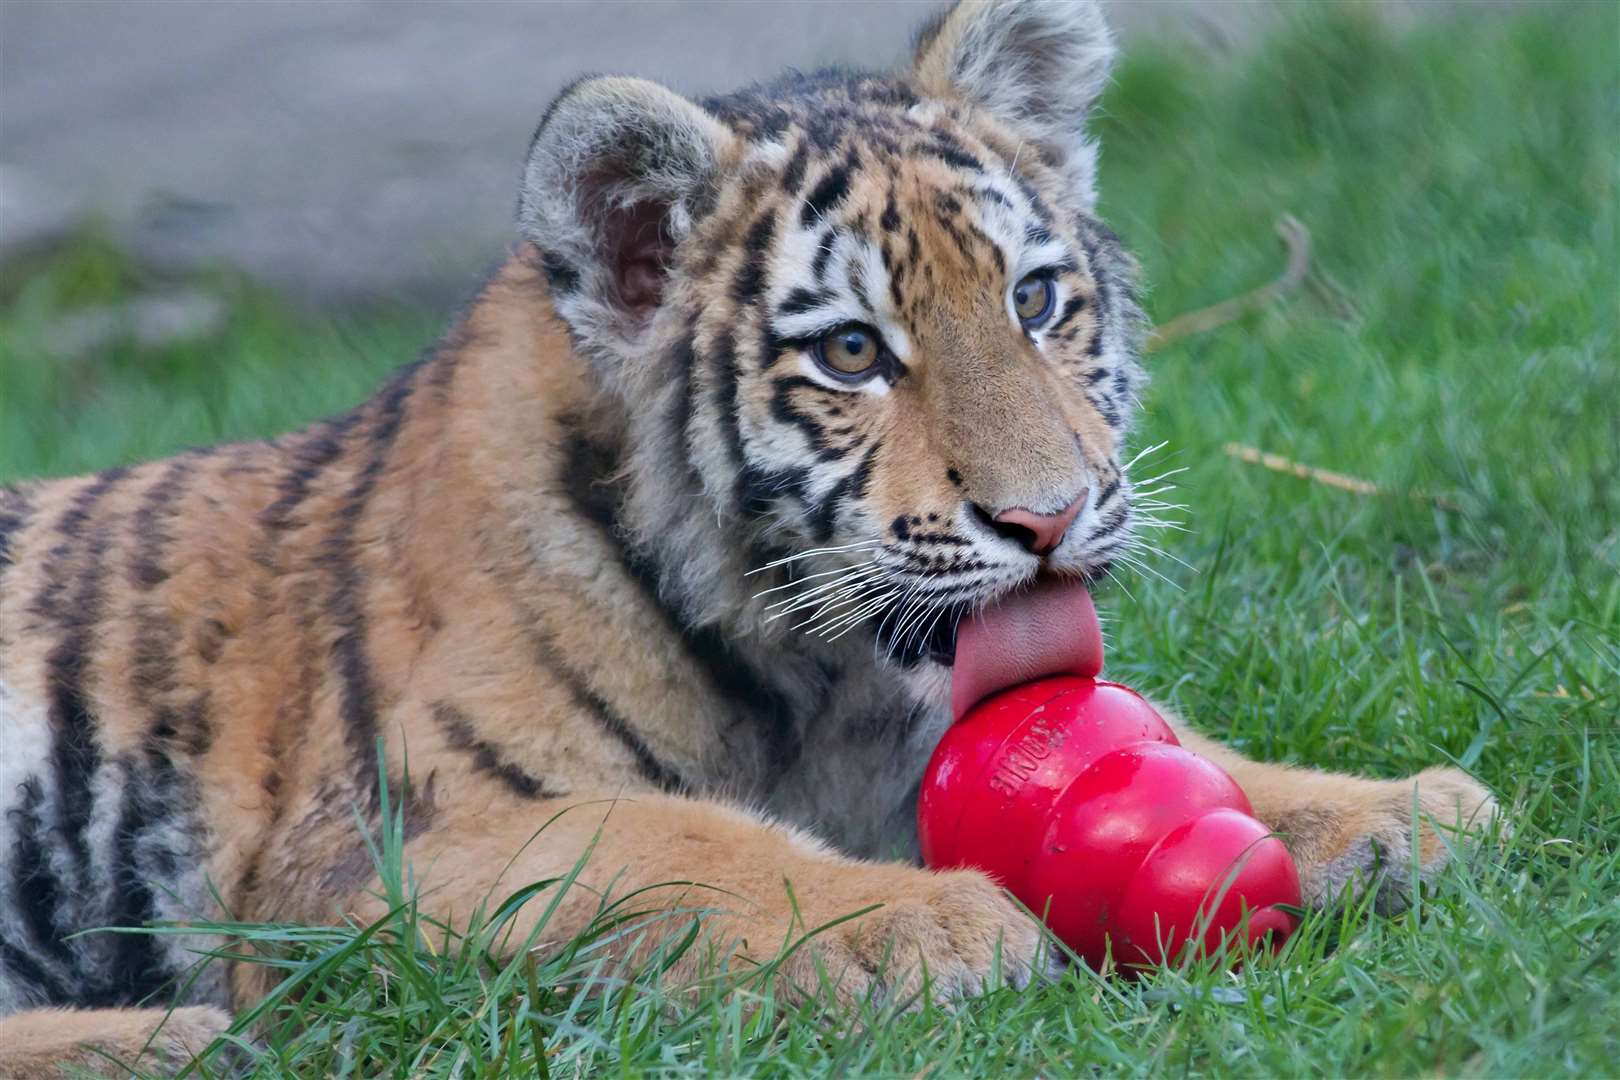 A tiger cub at Howletts zoo. Picture: David Mullaney